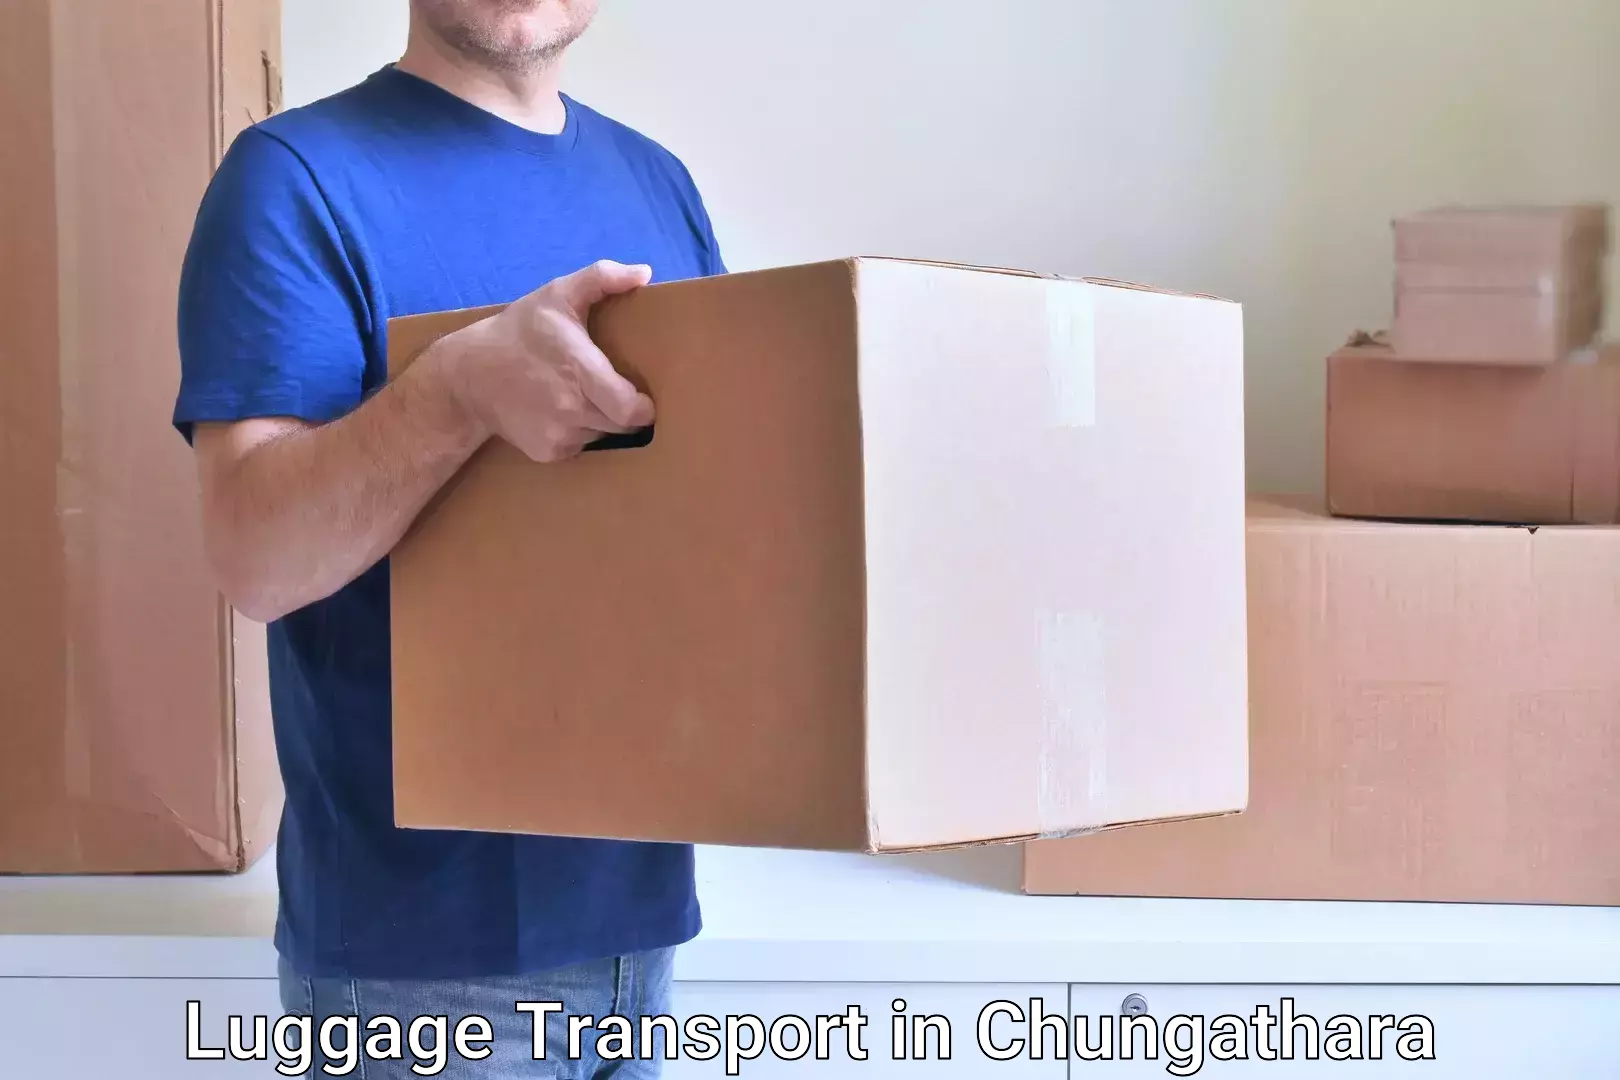 Long distance luggage transport in Chungathara